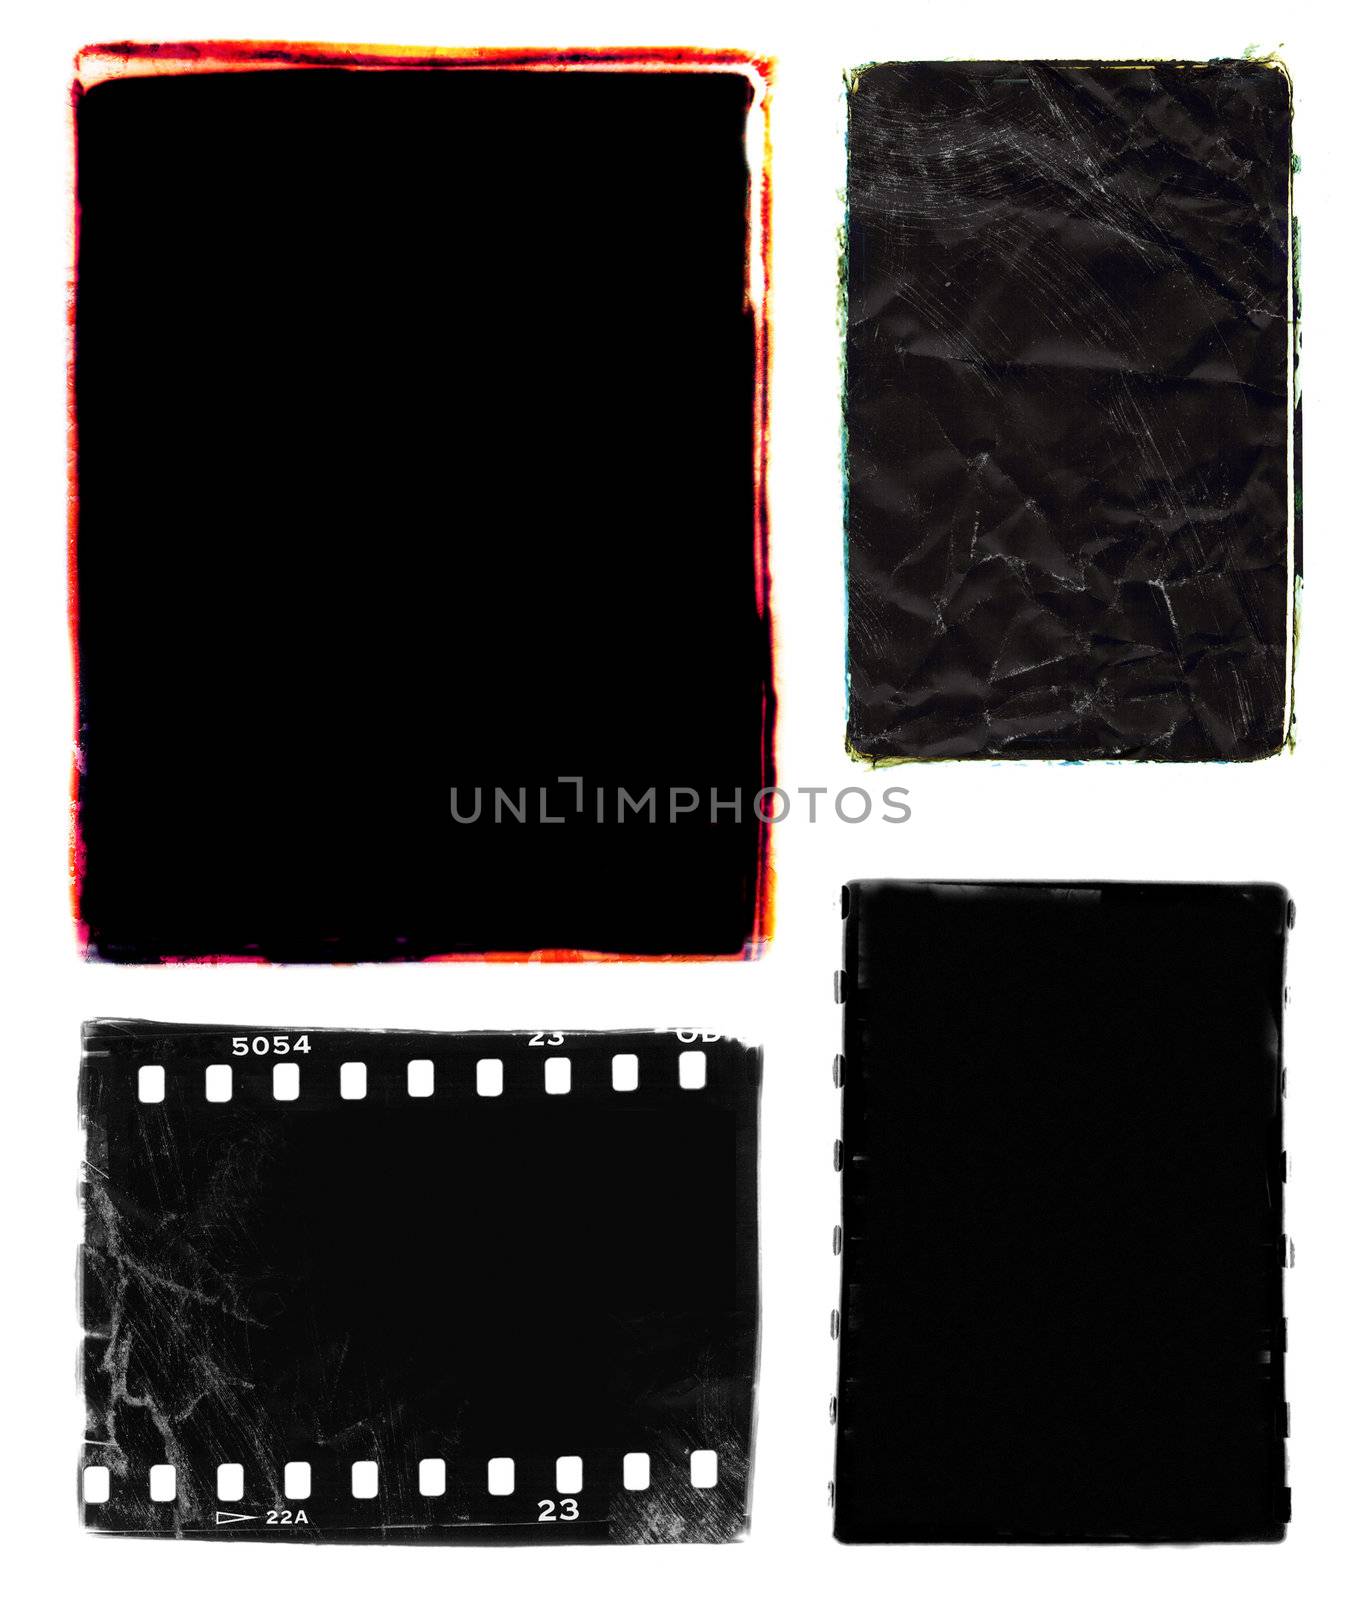 Series of four darkroom 35mm film photo borders with rough edges - one with sprocket holes, two with colour edges.  Frames were created by filing the metal edges of different negative carriers for my enlarger.  Scanned, mutilated and altered in photoshop.
